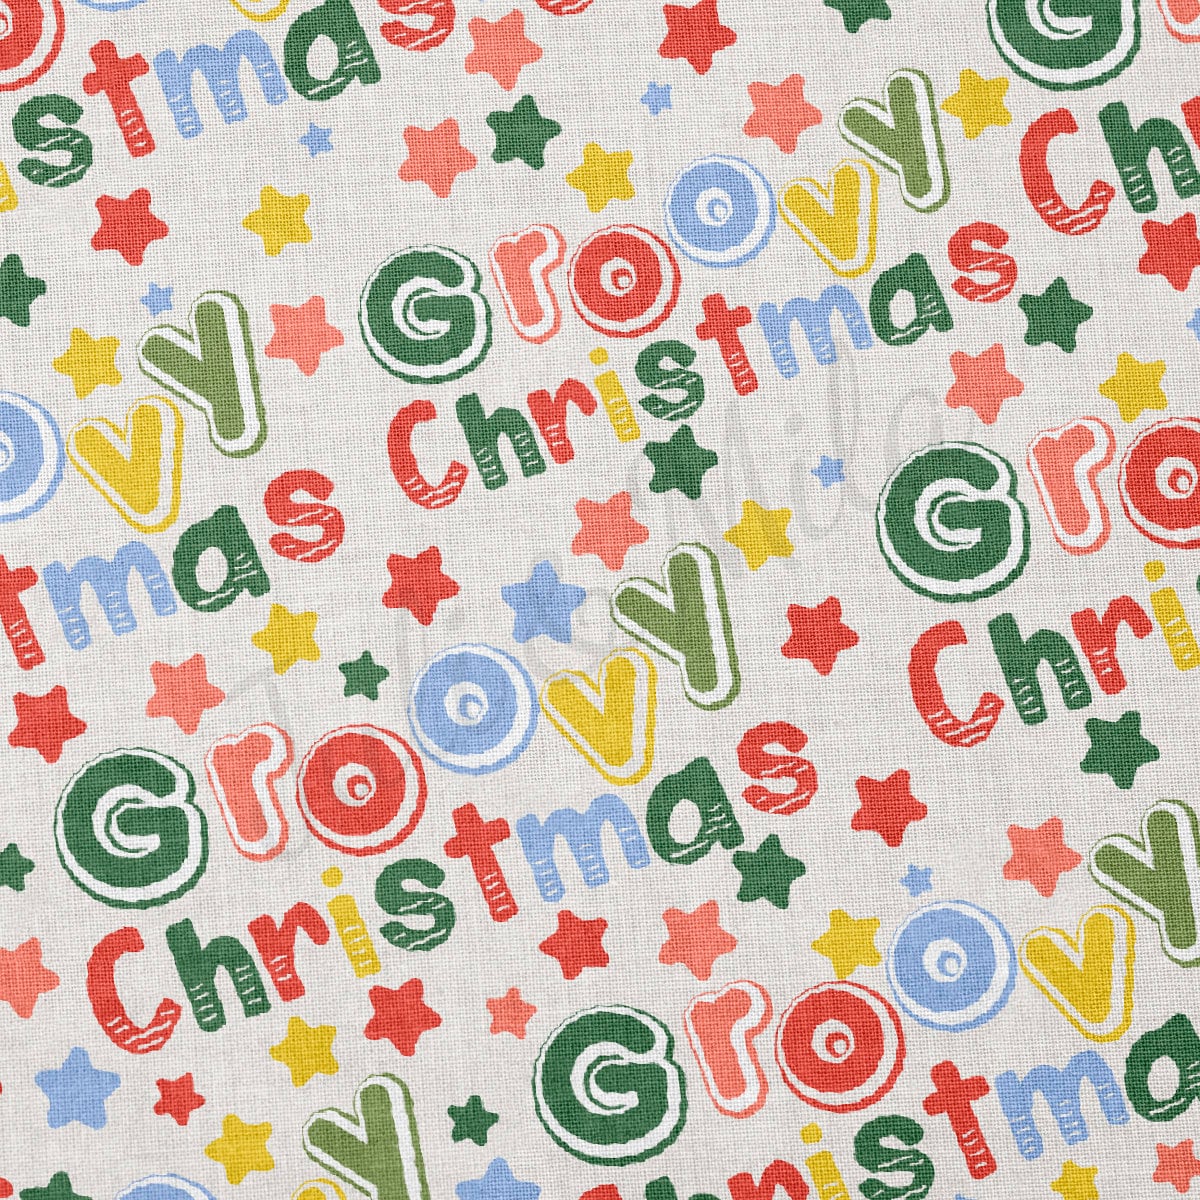 100% Cotton Fabric By the Yard Printed in USA Cotton Sateen -  Cotton CNT2032 Christmas